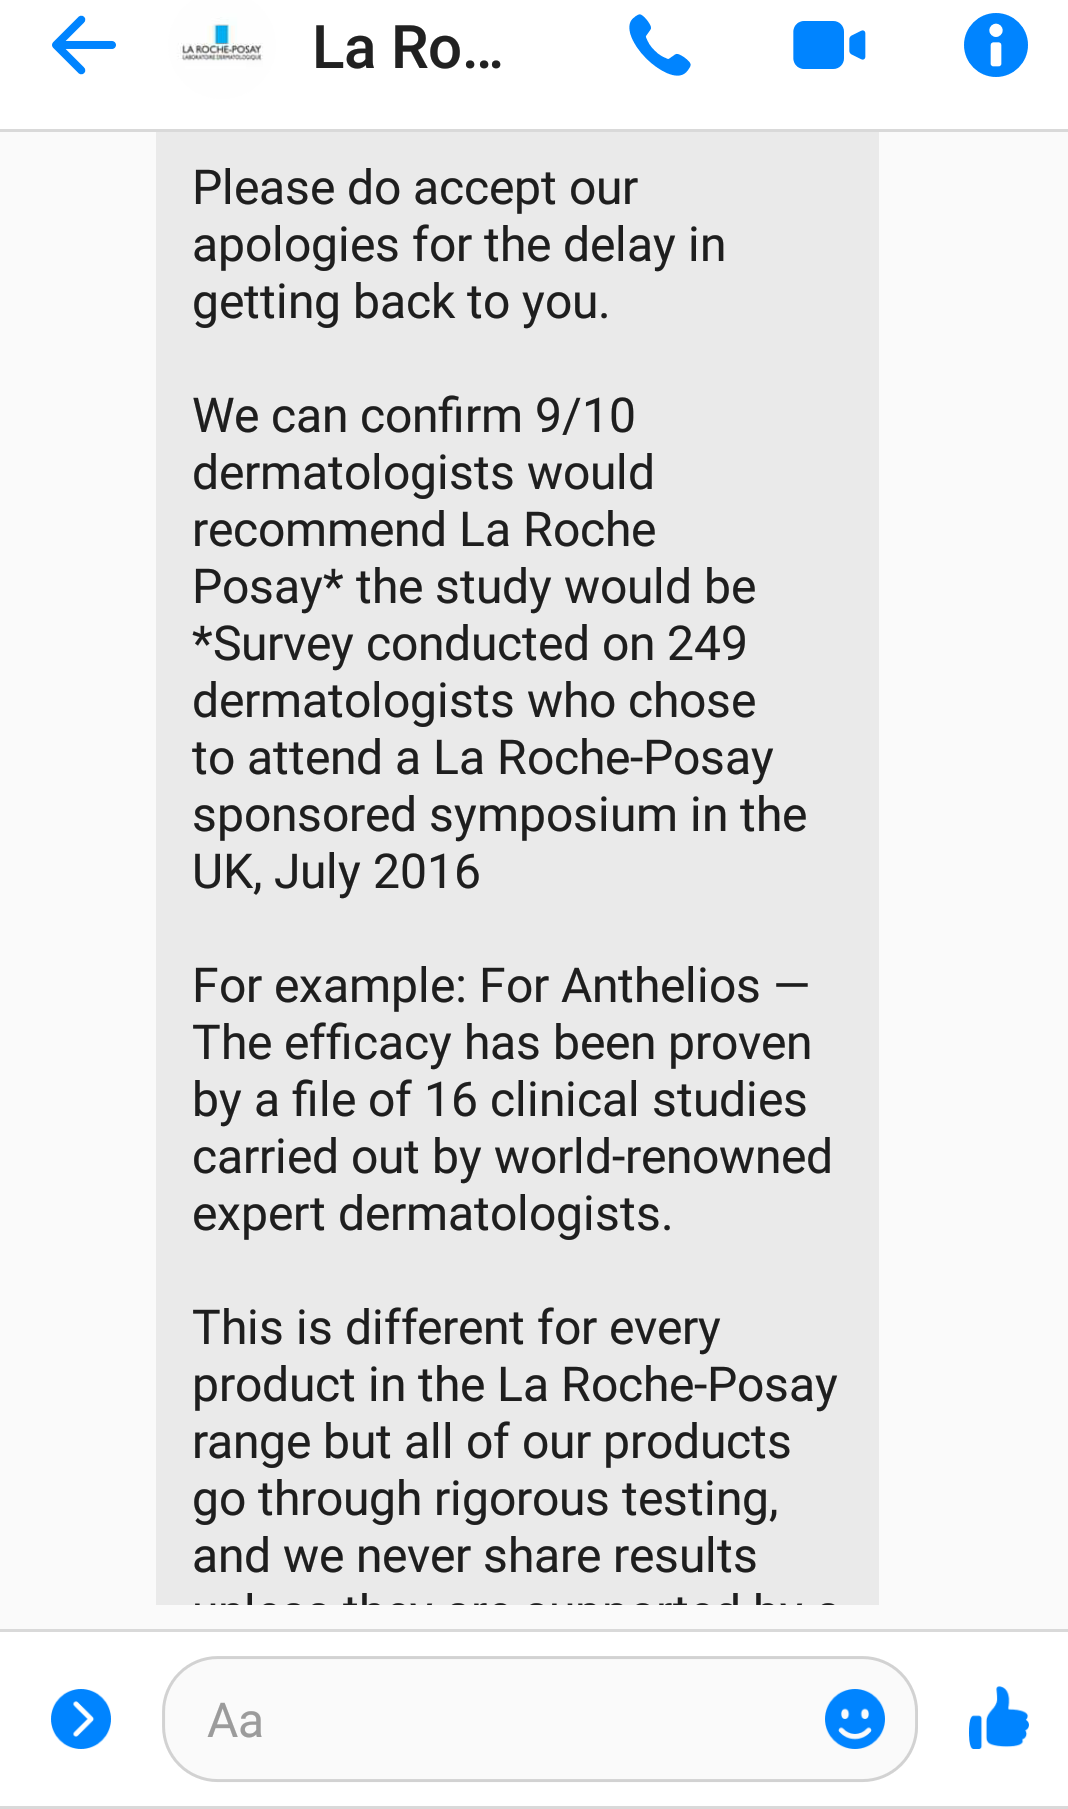 A screenshot of my social media conversation with La Roche-Posay to represent the topic of the article - A Moisturiser Review: Complex Skin And Mental Health